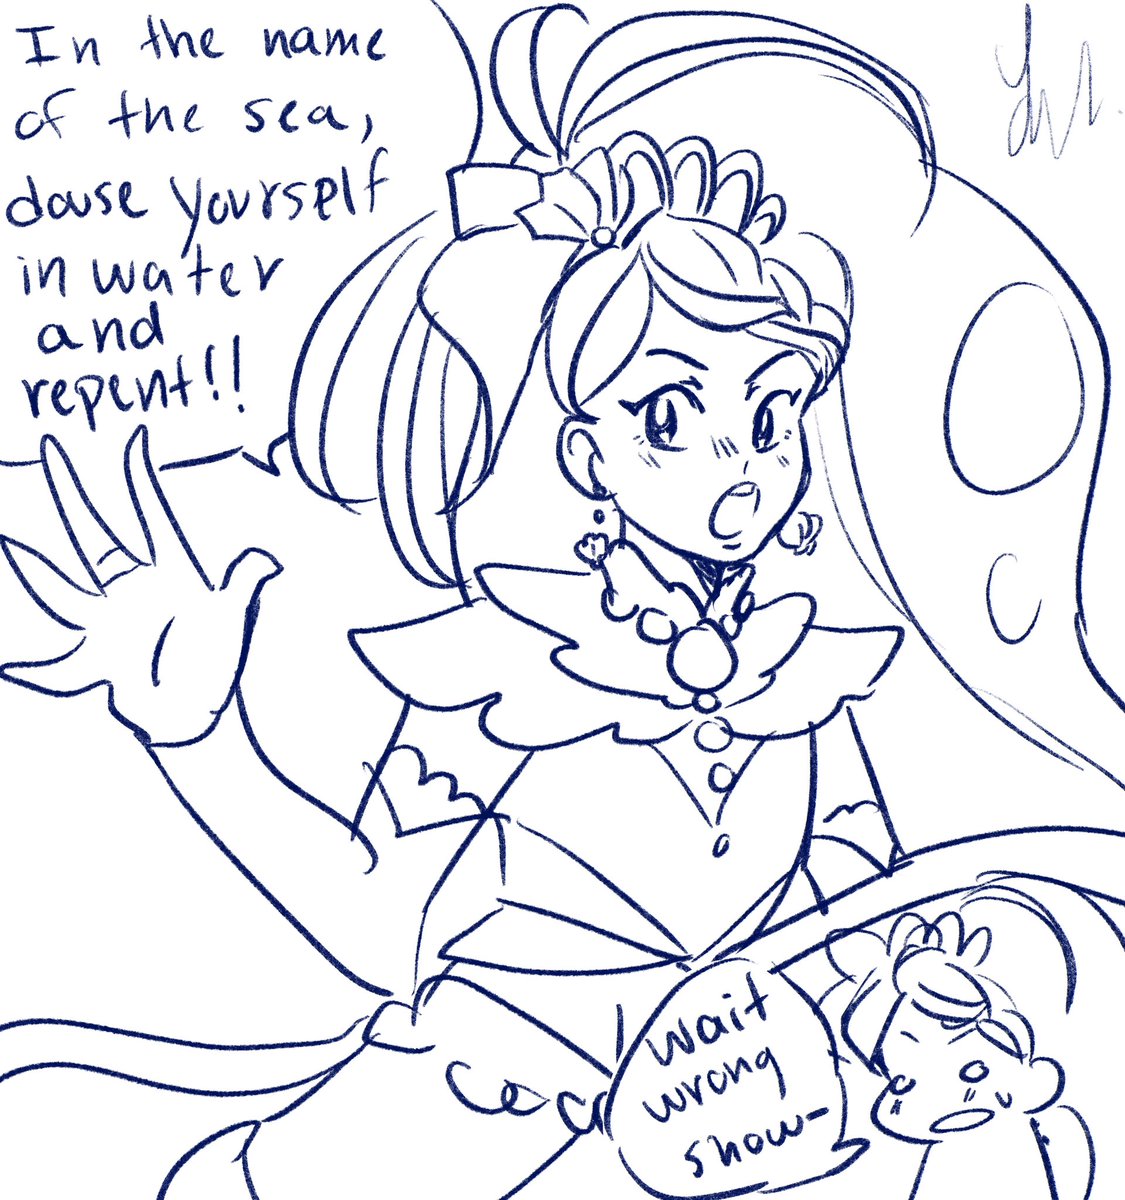 why yes i do have a favorite princess precure character, thank you for asking 